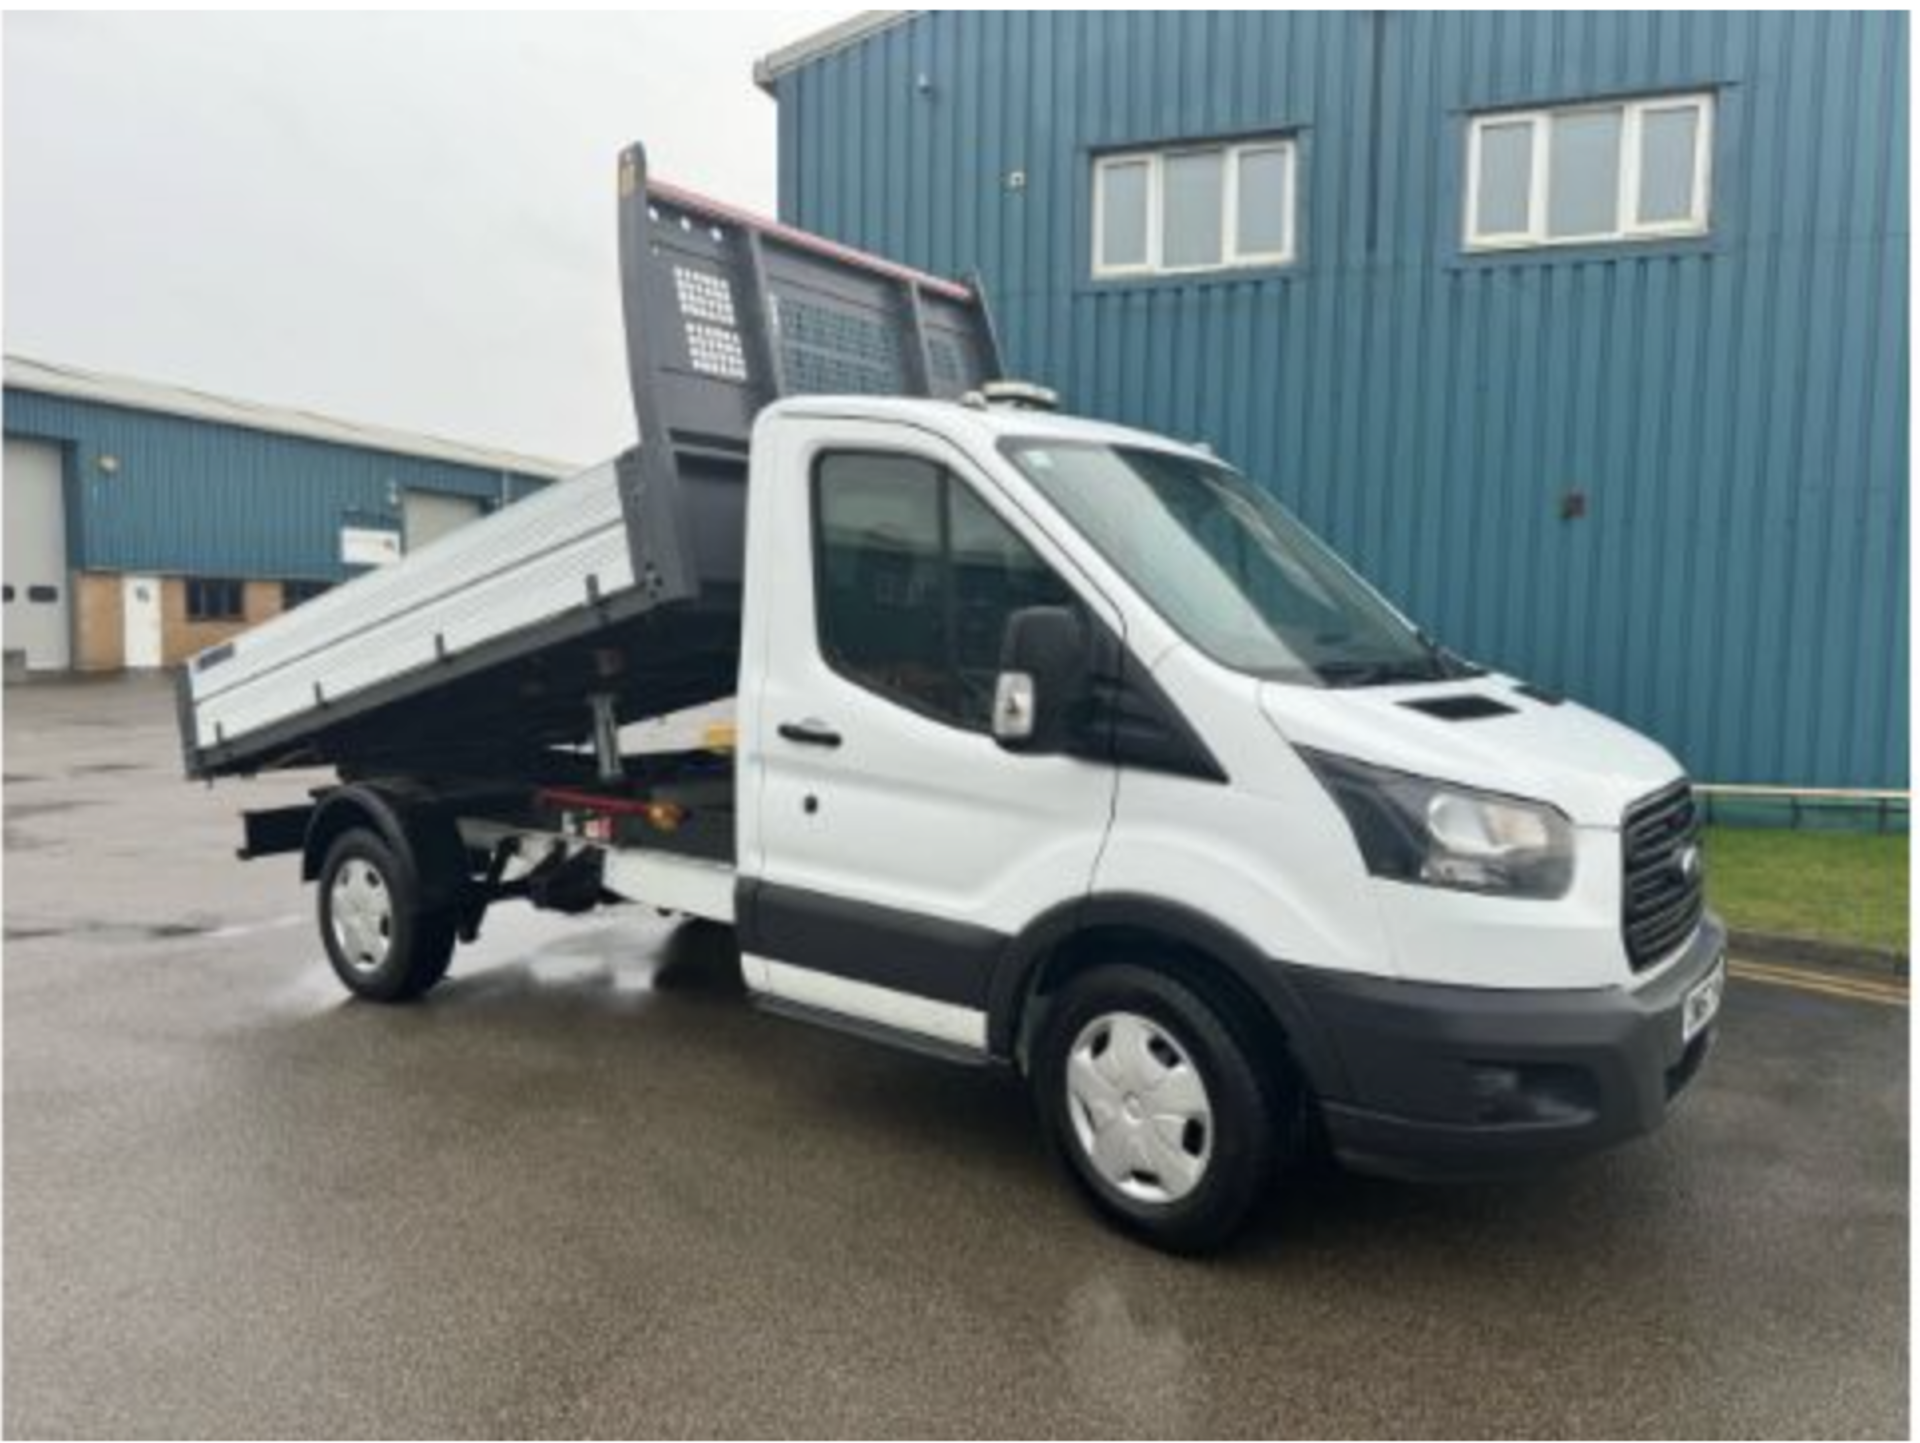 FORD TRANSIT 2.0 TIPPER130ps 'One Stop' Tipper - Manual - Diesel - 2.0 - Tipper Body 94.6k miles - Image 2 of 11